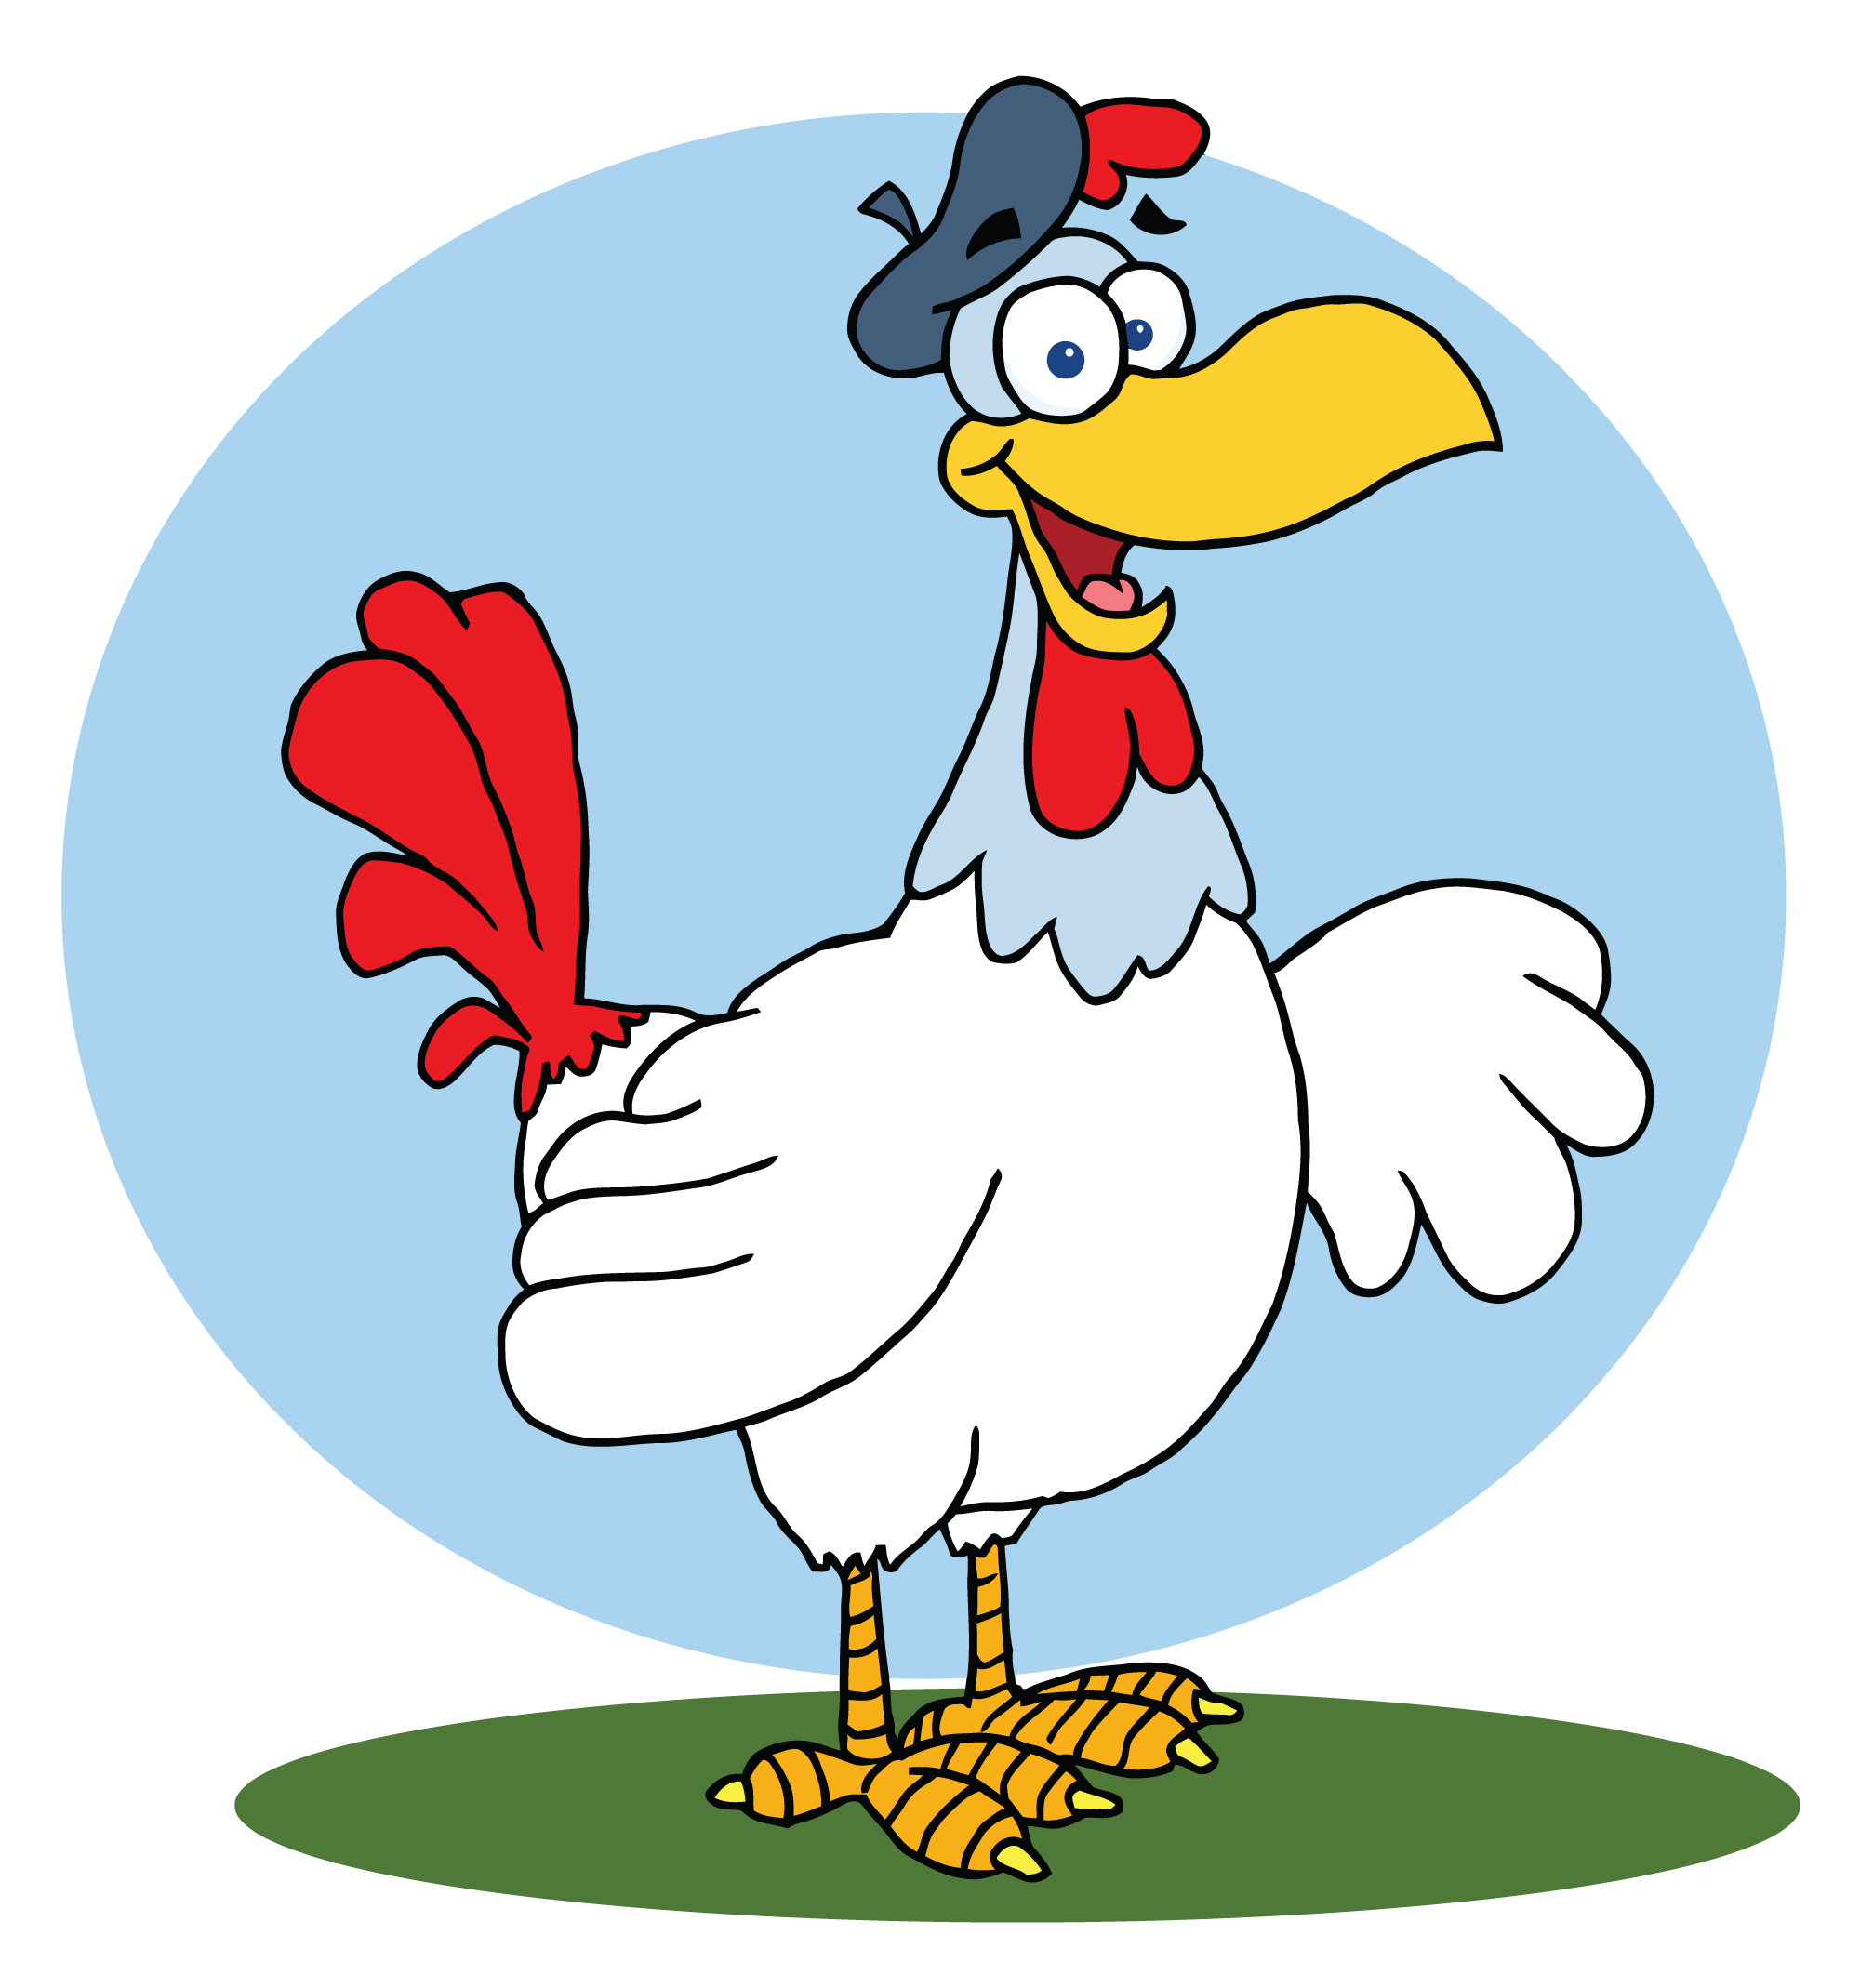 Free Chicken Pictures Cartoon, Download Free Clip Art, Free.